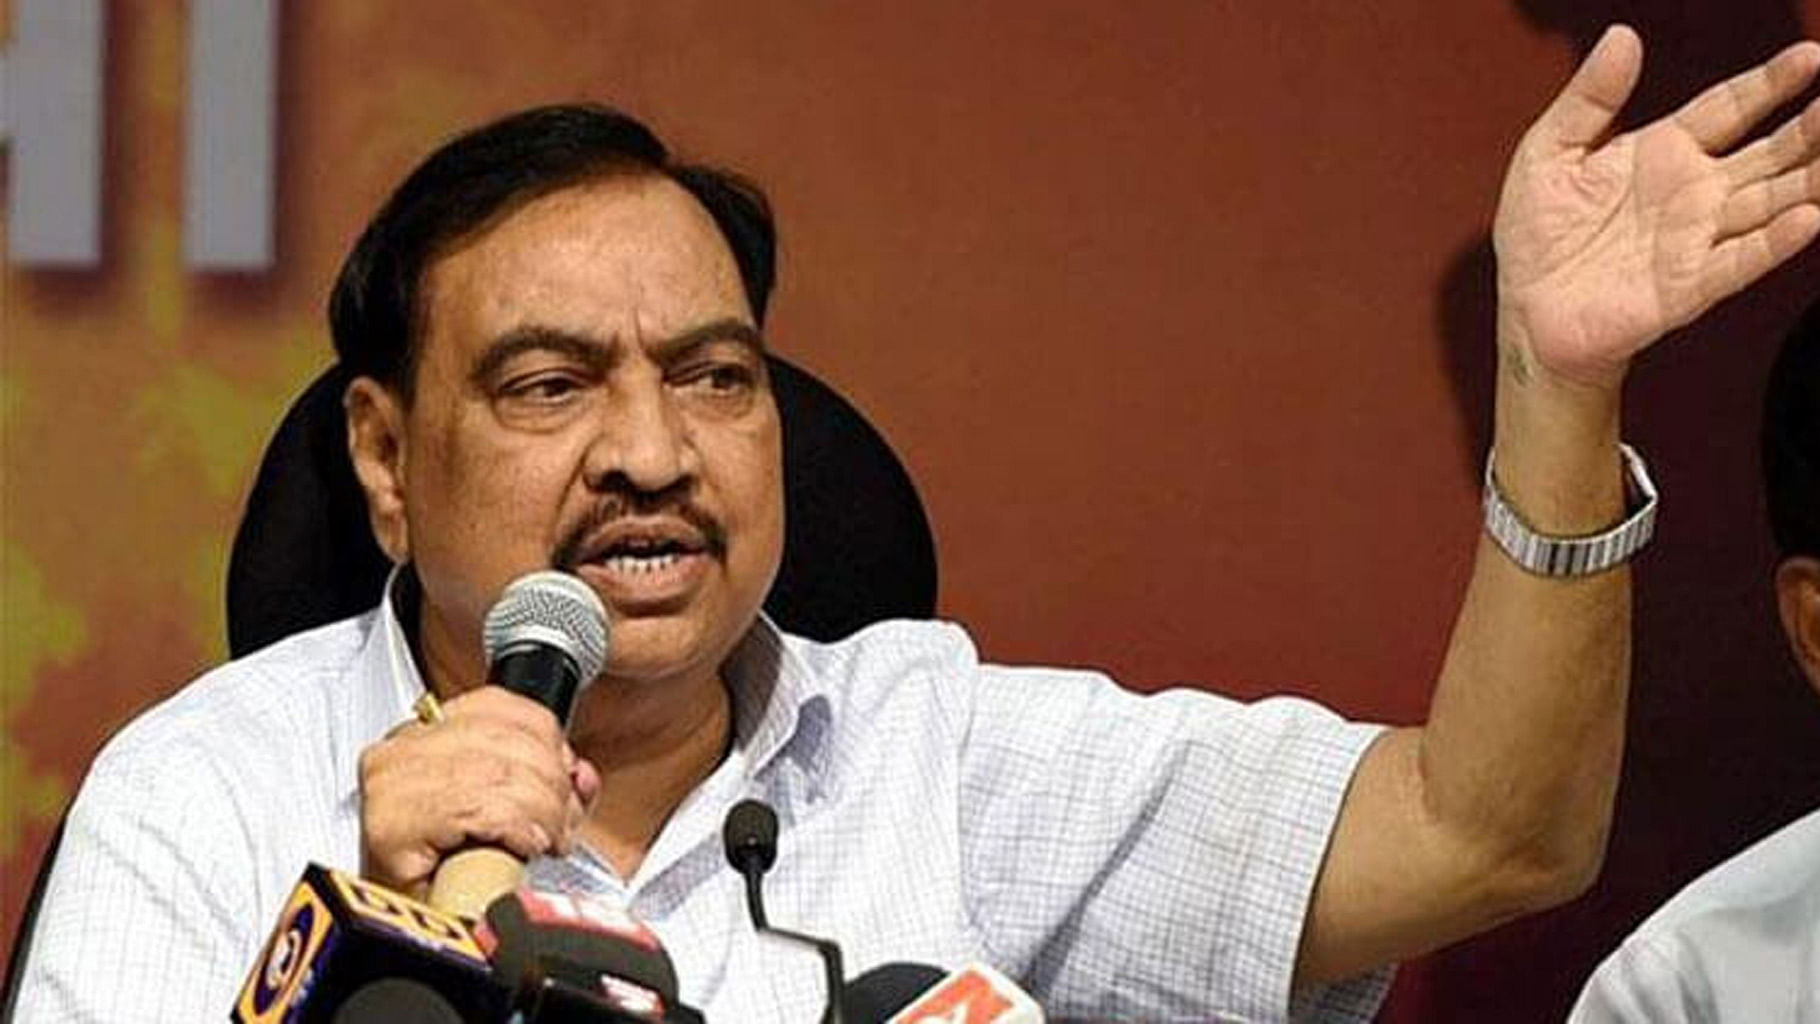 Eknath Khadse  is facing twin charges for his involvement in an illicit land deal and alleged connection with underworld don Dawood Ibrahim. (Photo: PTI)